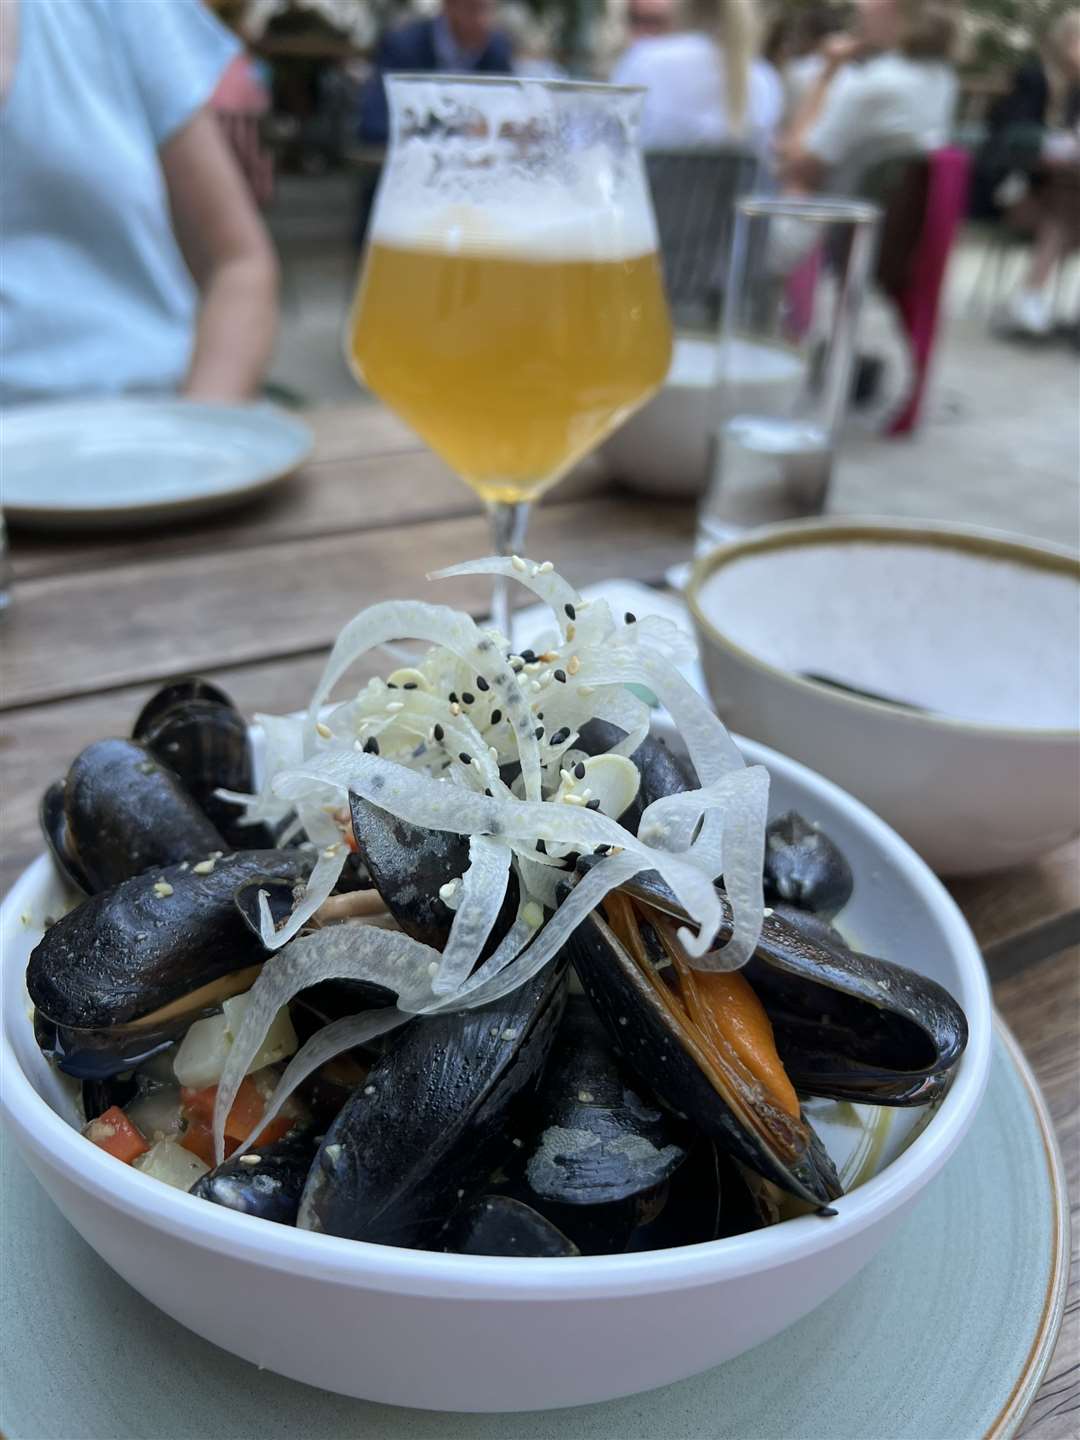 When in Belgium it would be rude not to try the mussels and frites, washed down with a beer